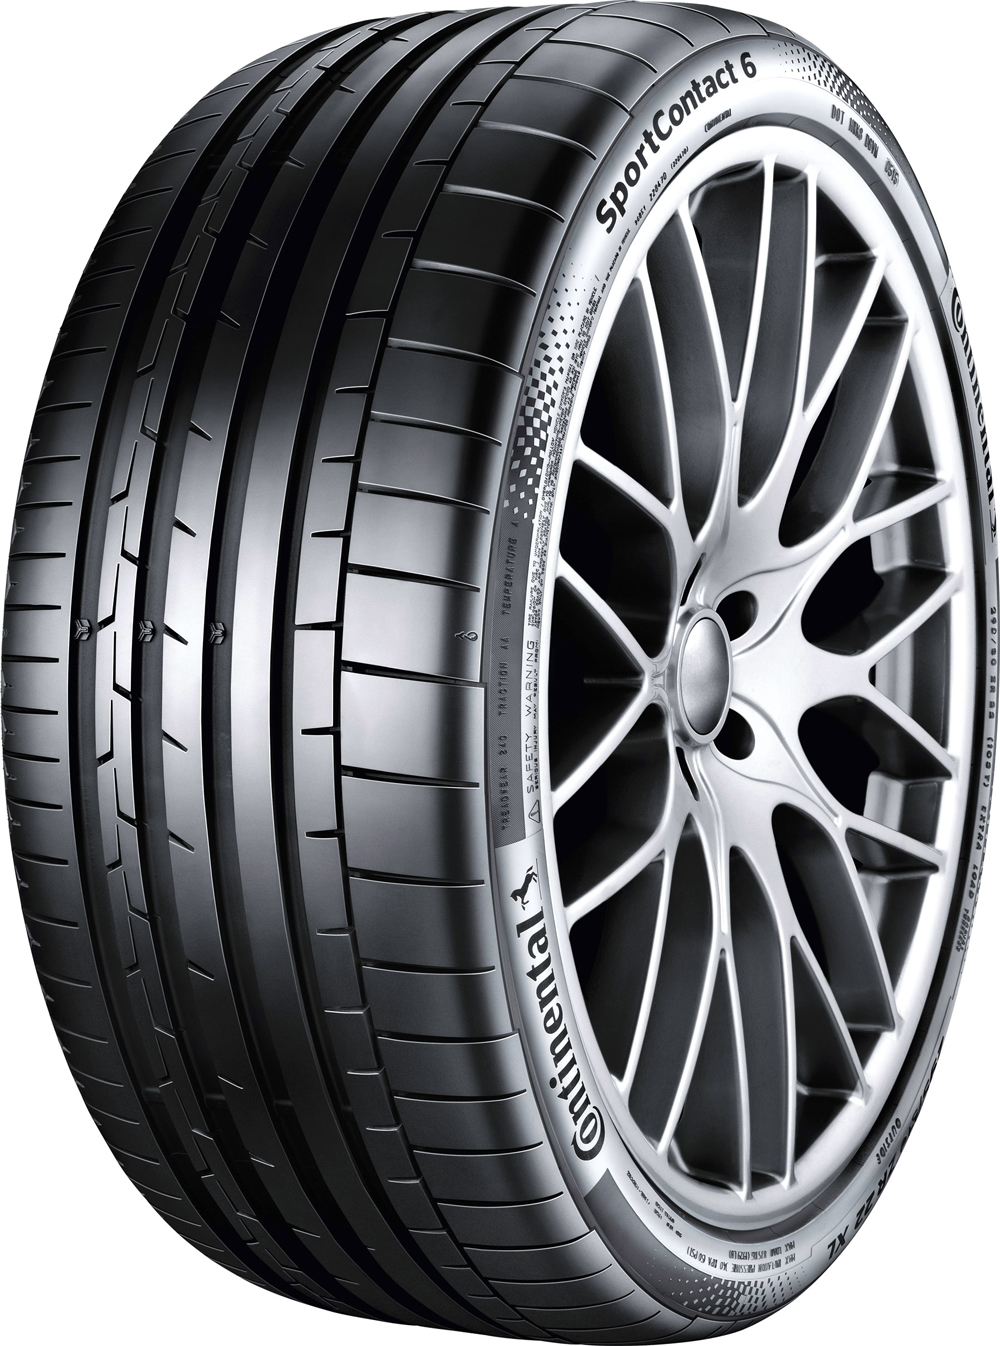 Anvelope auto CONTINENTAL CSC6MO1XL XL 245/40 R18 97Y